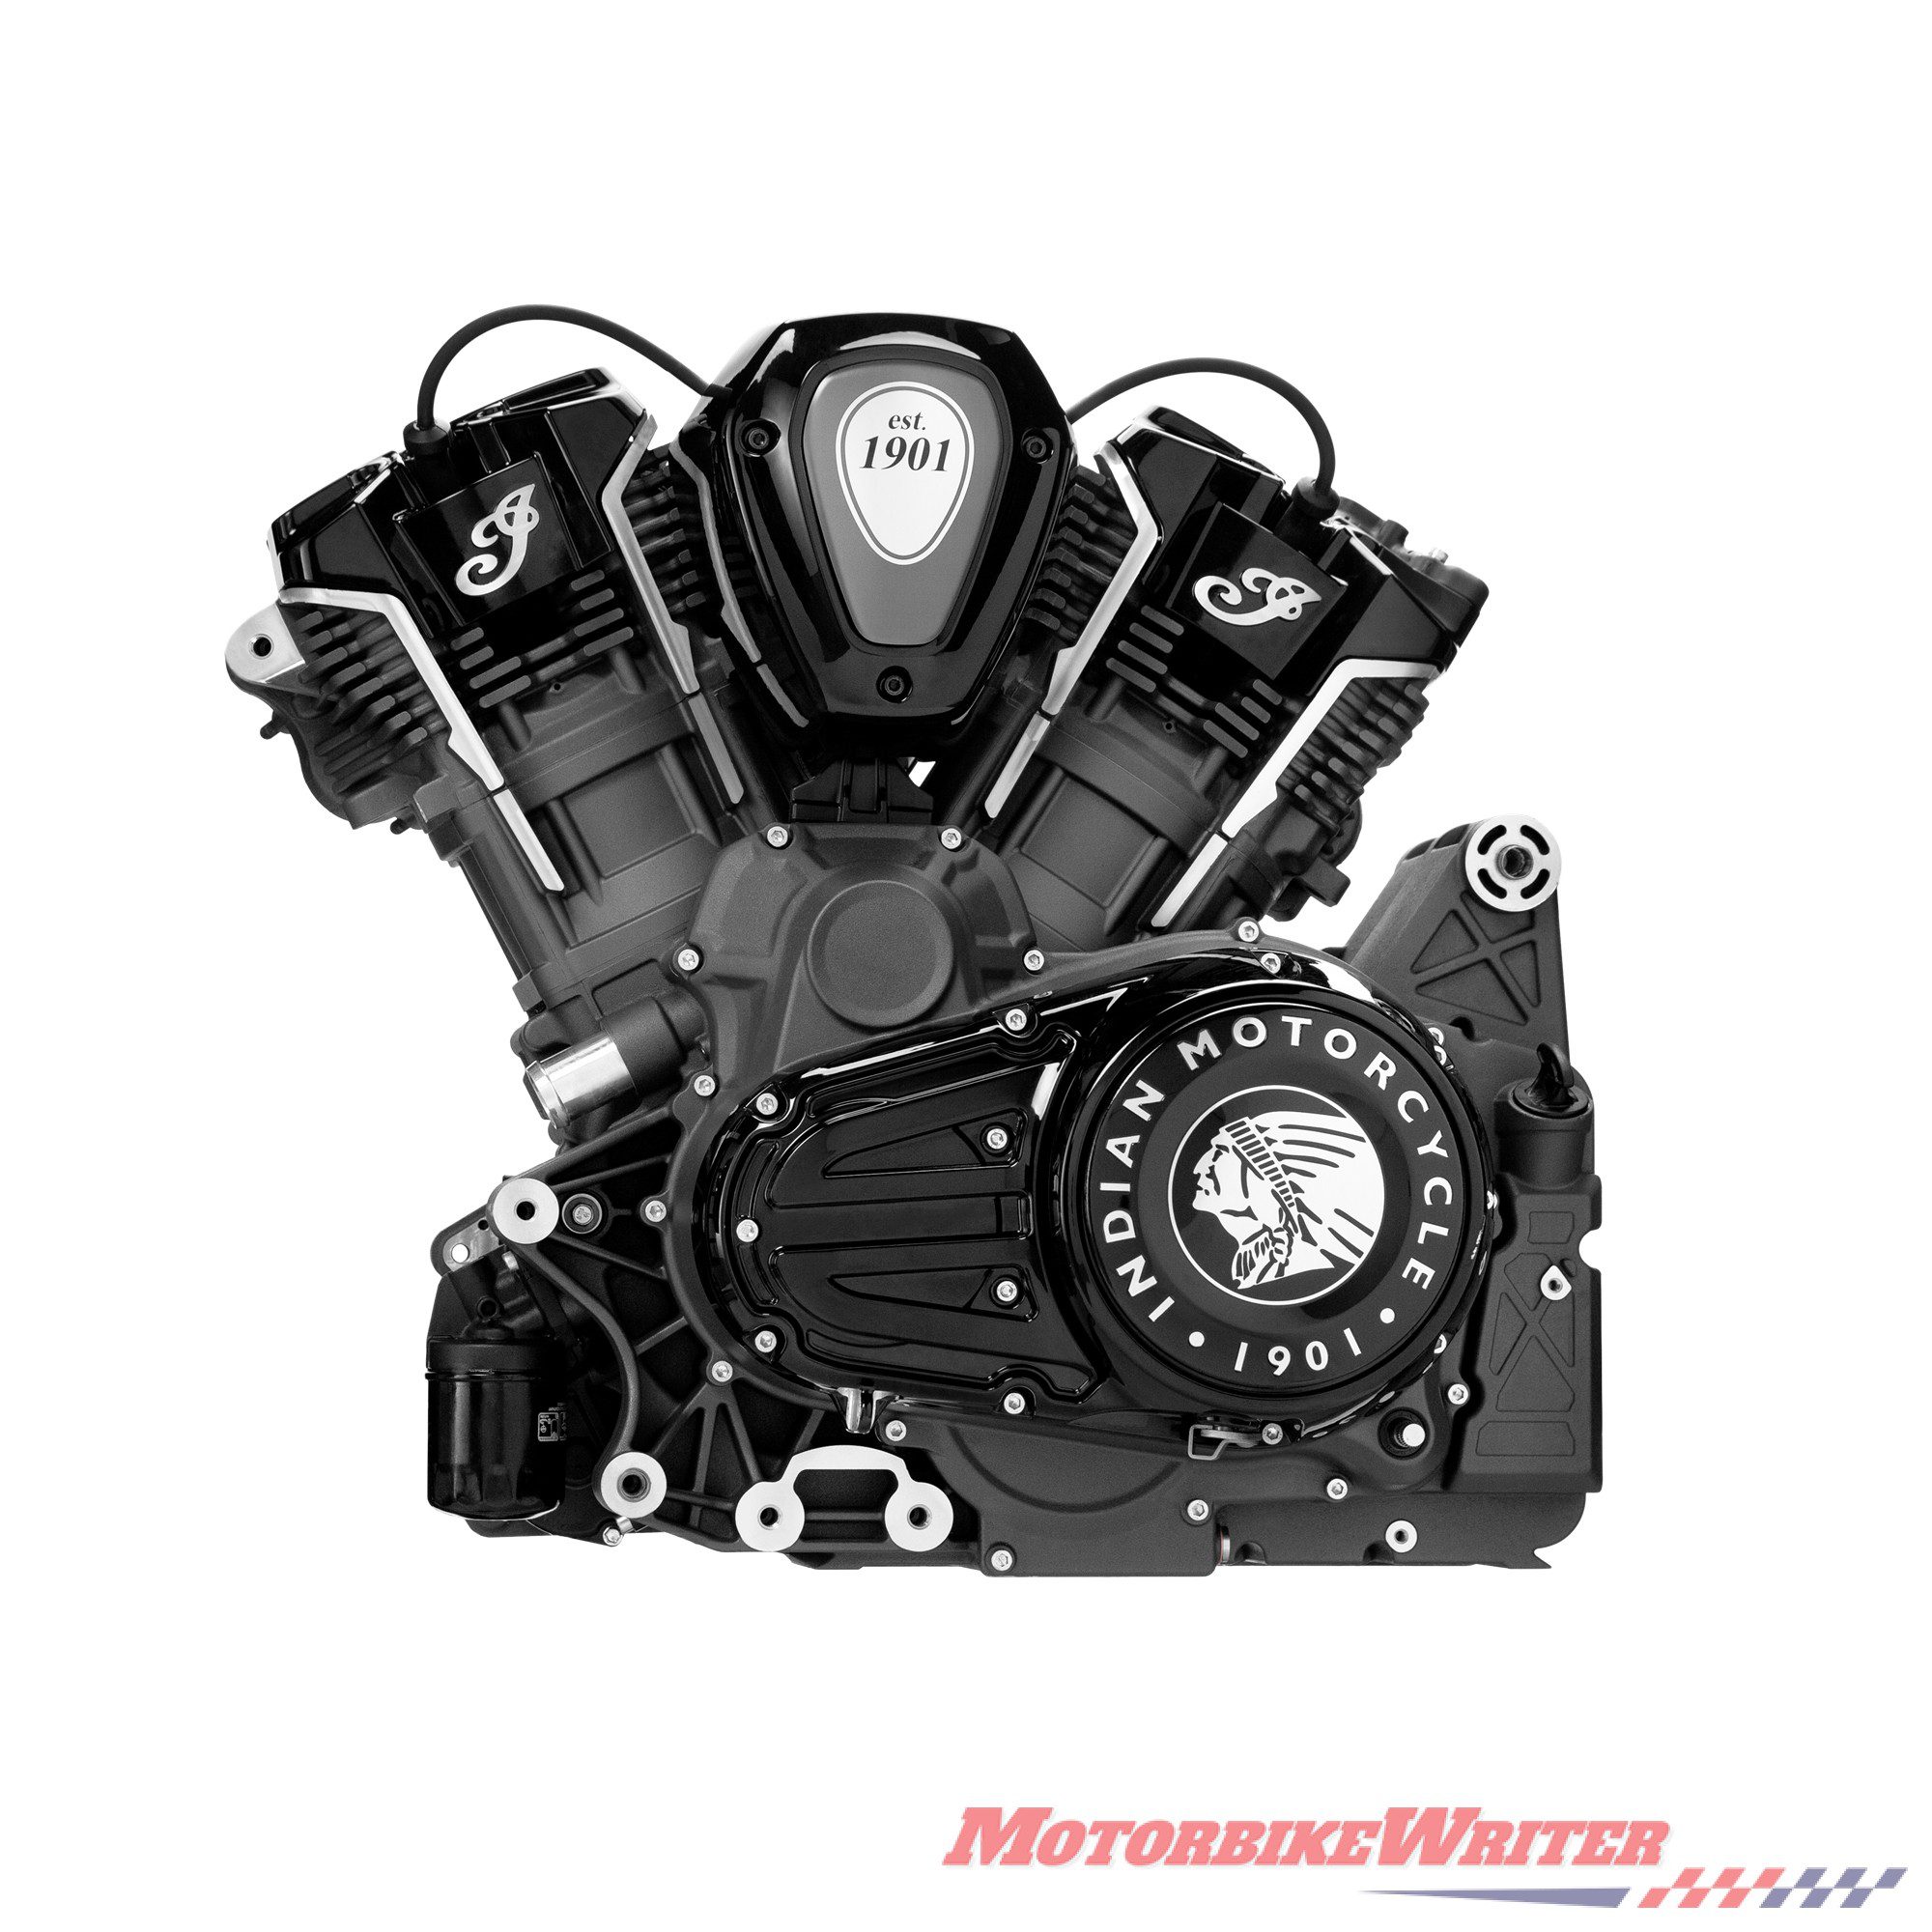 New liquid cooled Powerplus – A New Level Of V-Twin Performance From Indian